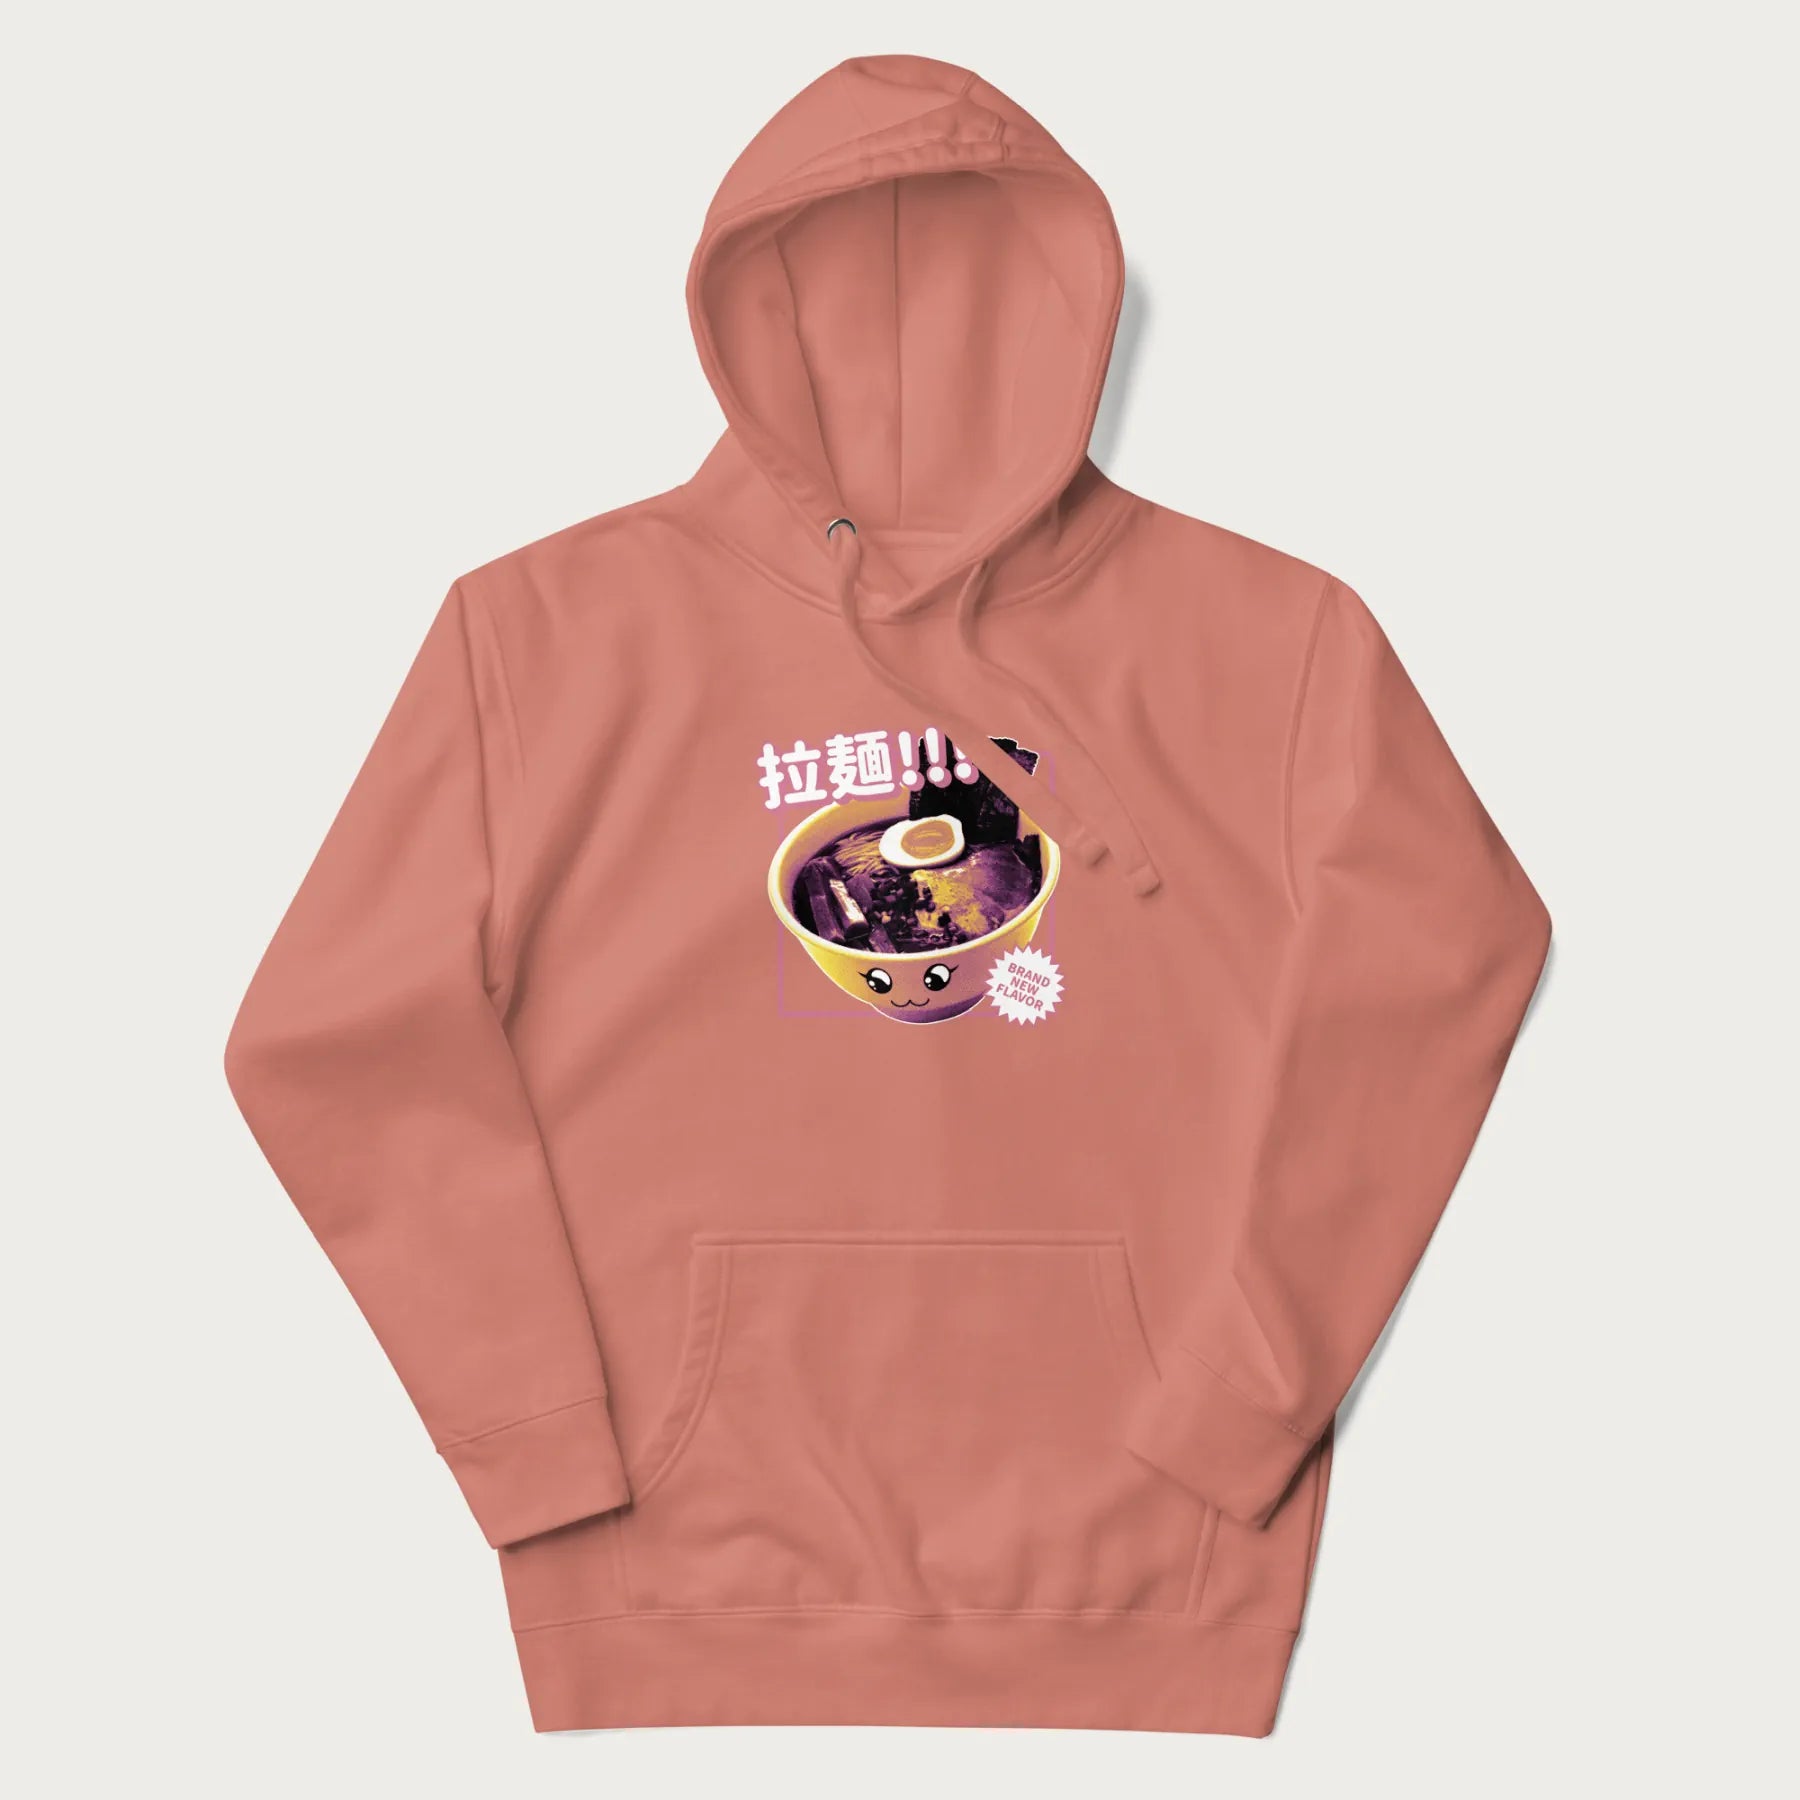 Light pink hoodie with Japanese text '拉麵!!!' (Ramen!!!) in vibrant pink and realistic ramen bowl graphic.